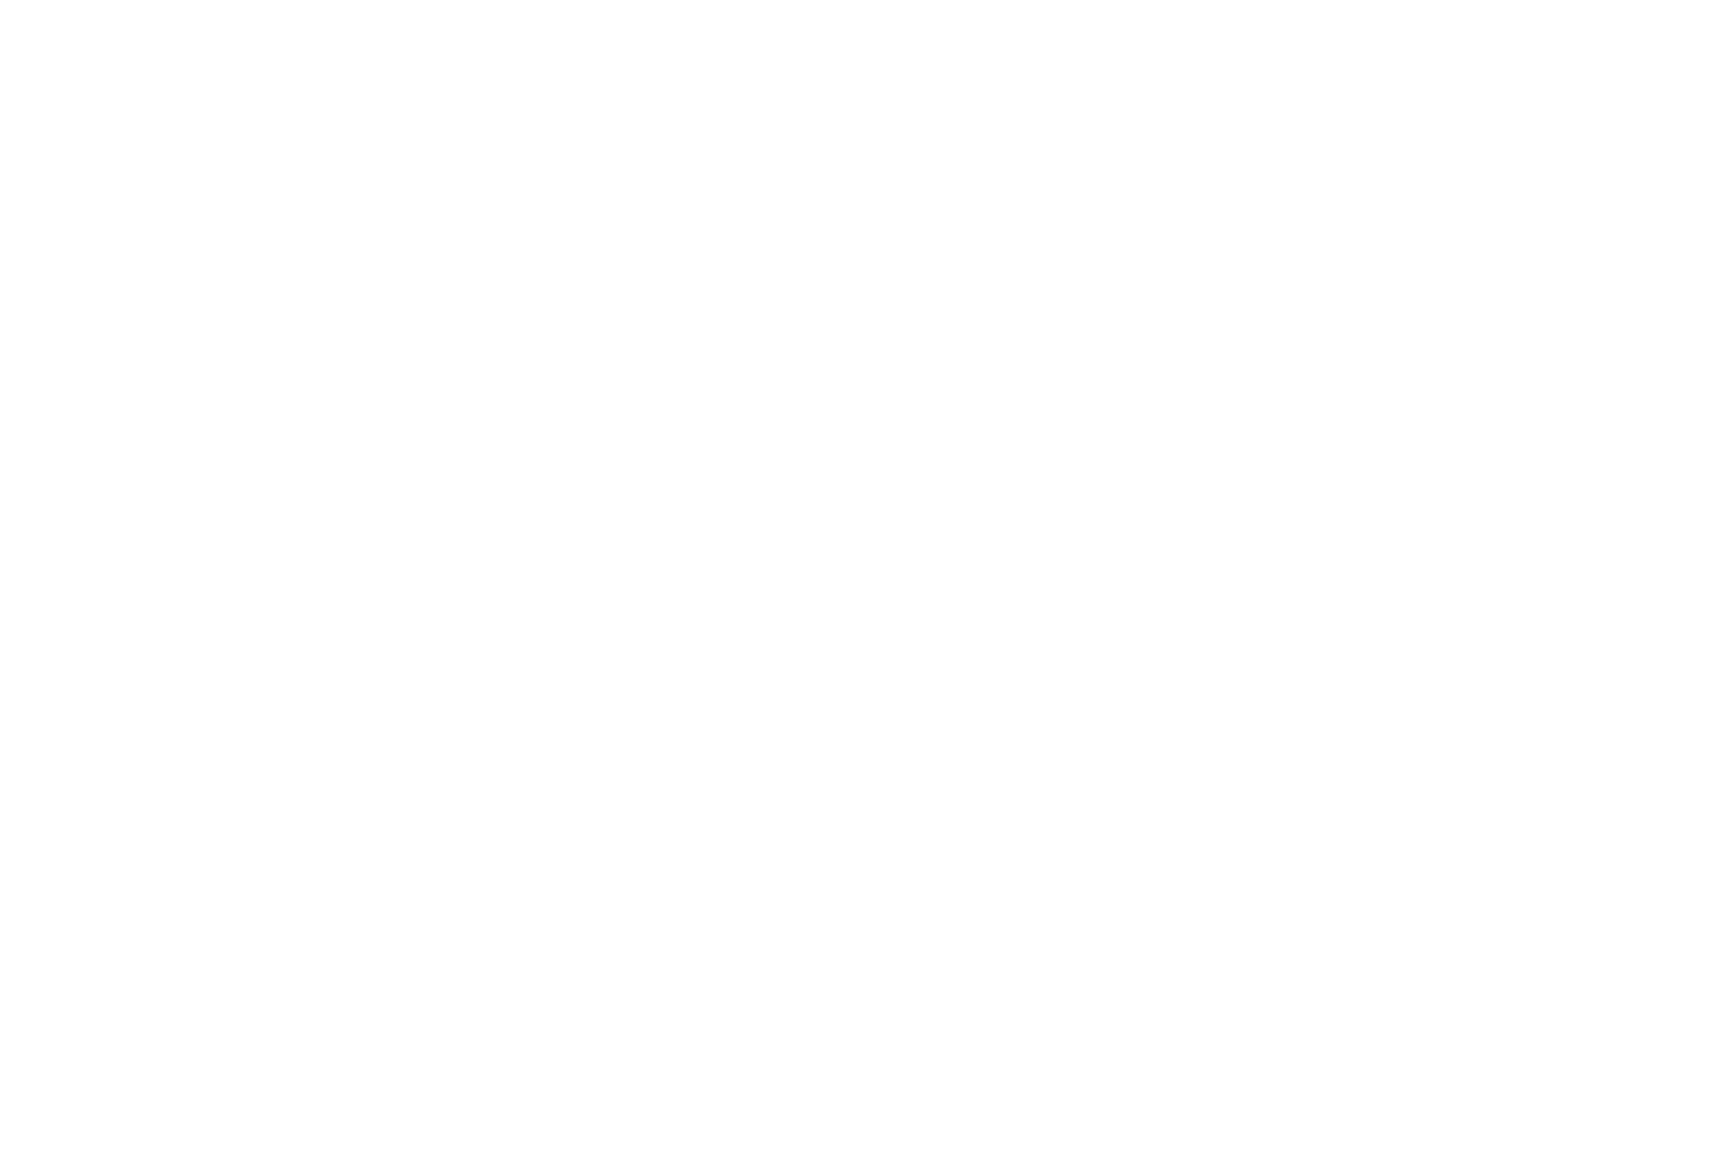 OFFICIAL SELECTION - SAN FRANCISCO DOCFEST - 2017_white.png